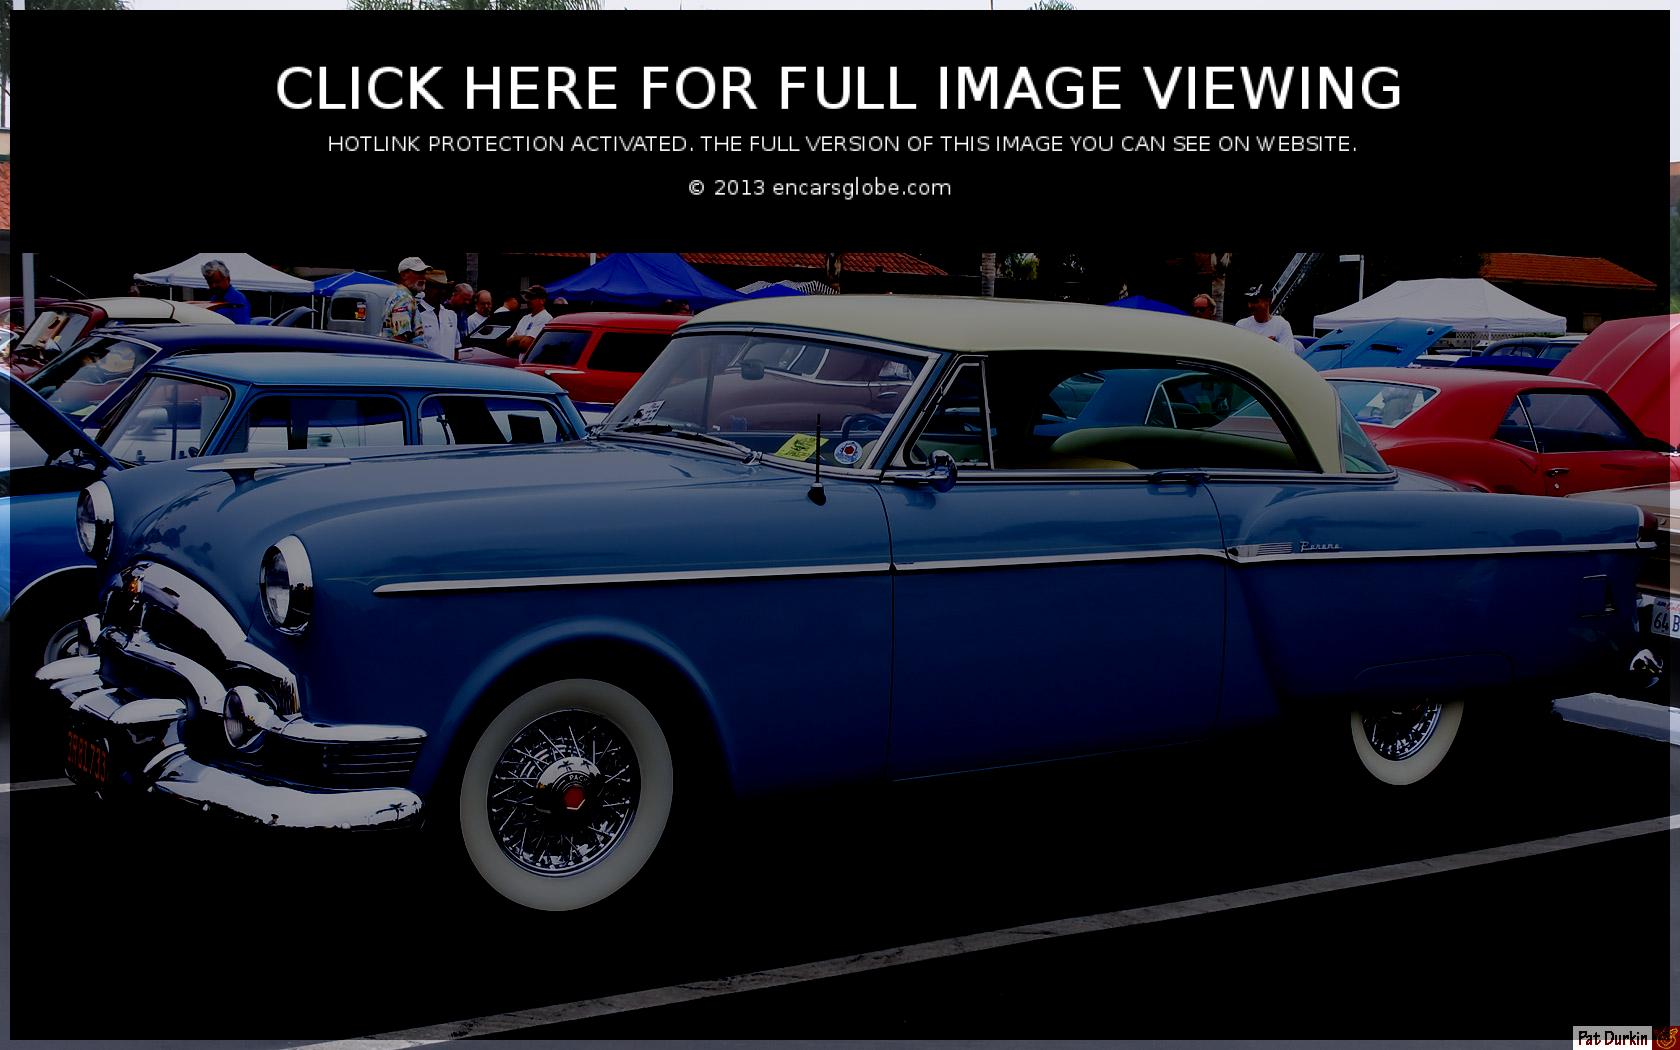 Packard Clipper Super Panama Photo Gallery: Photo #09 out of 12 ...